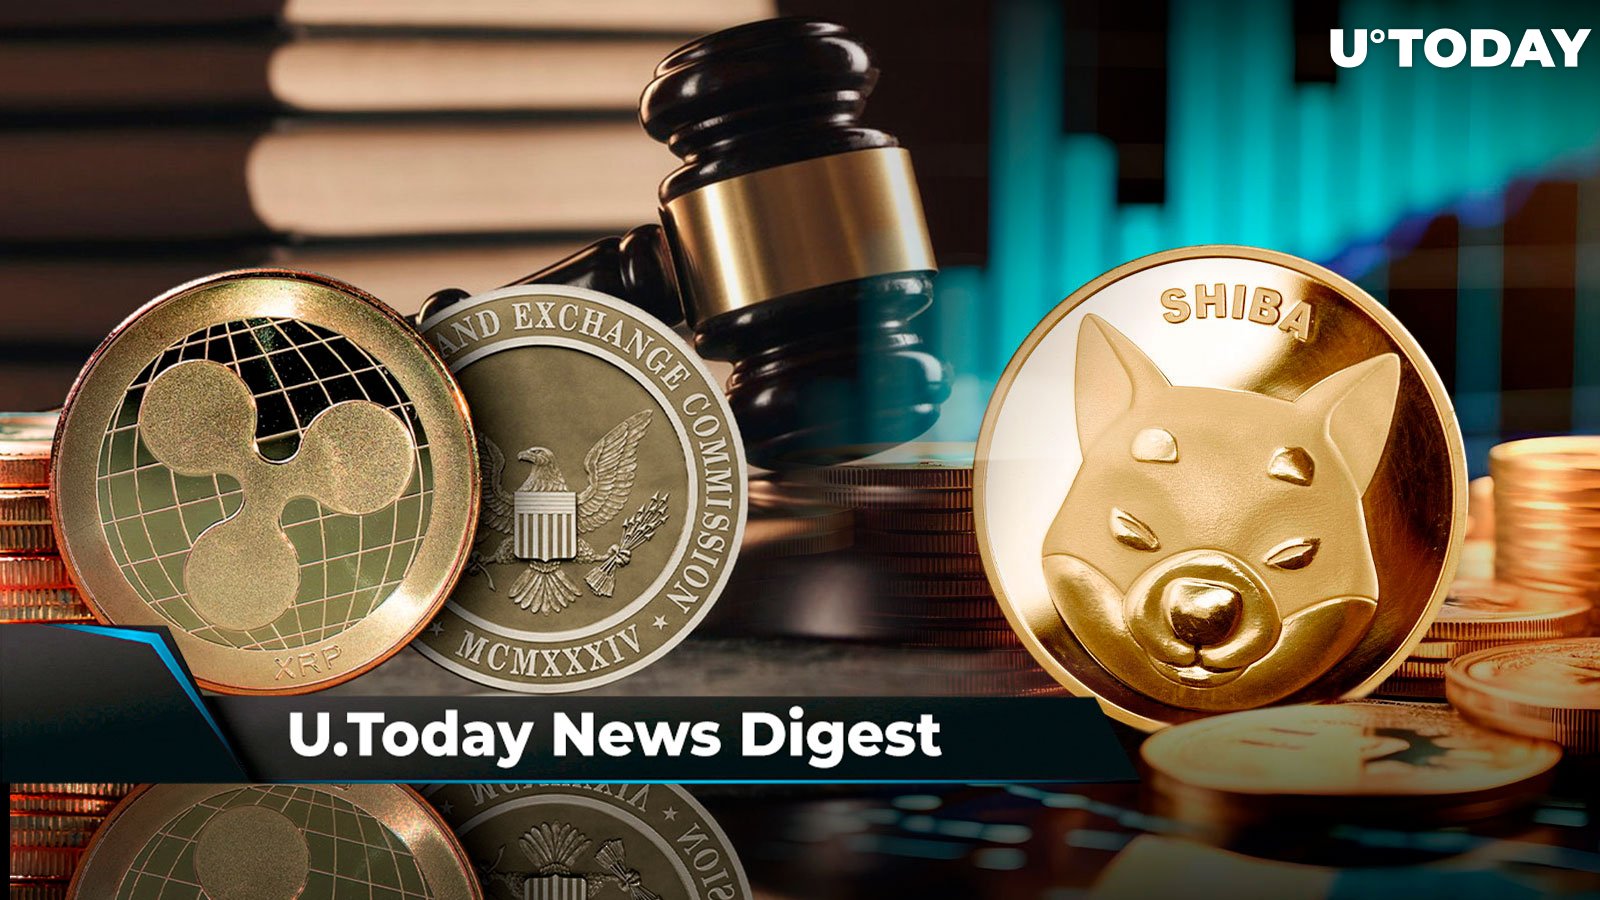 Ripple and SEC Jointly Agree to Seal Details in Remedies Briefing, Shiba Inu Team Member Expects New SHIB ATH Before BTC Halving: Crypto News Digest by U.Today